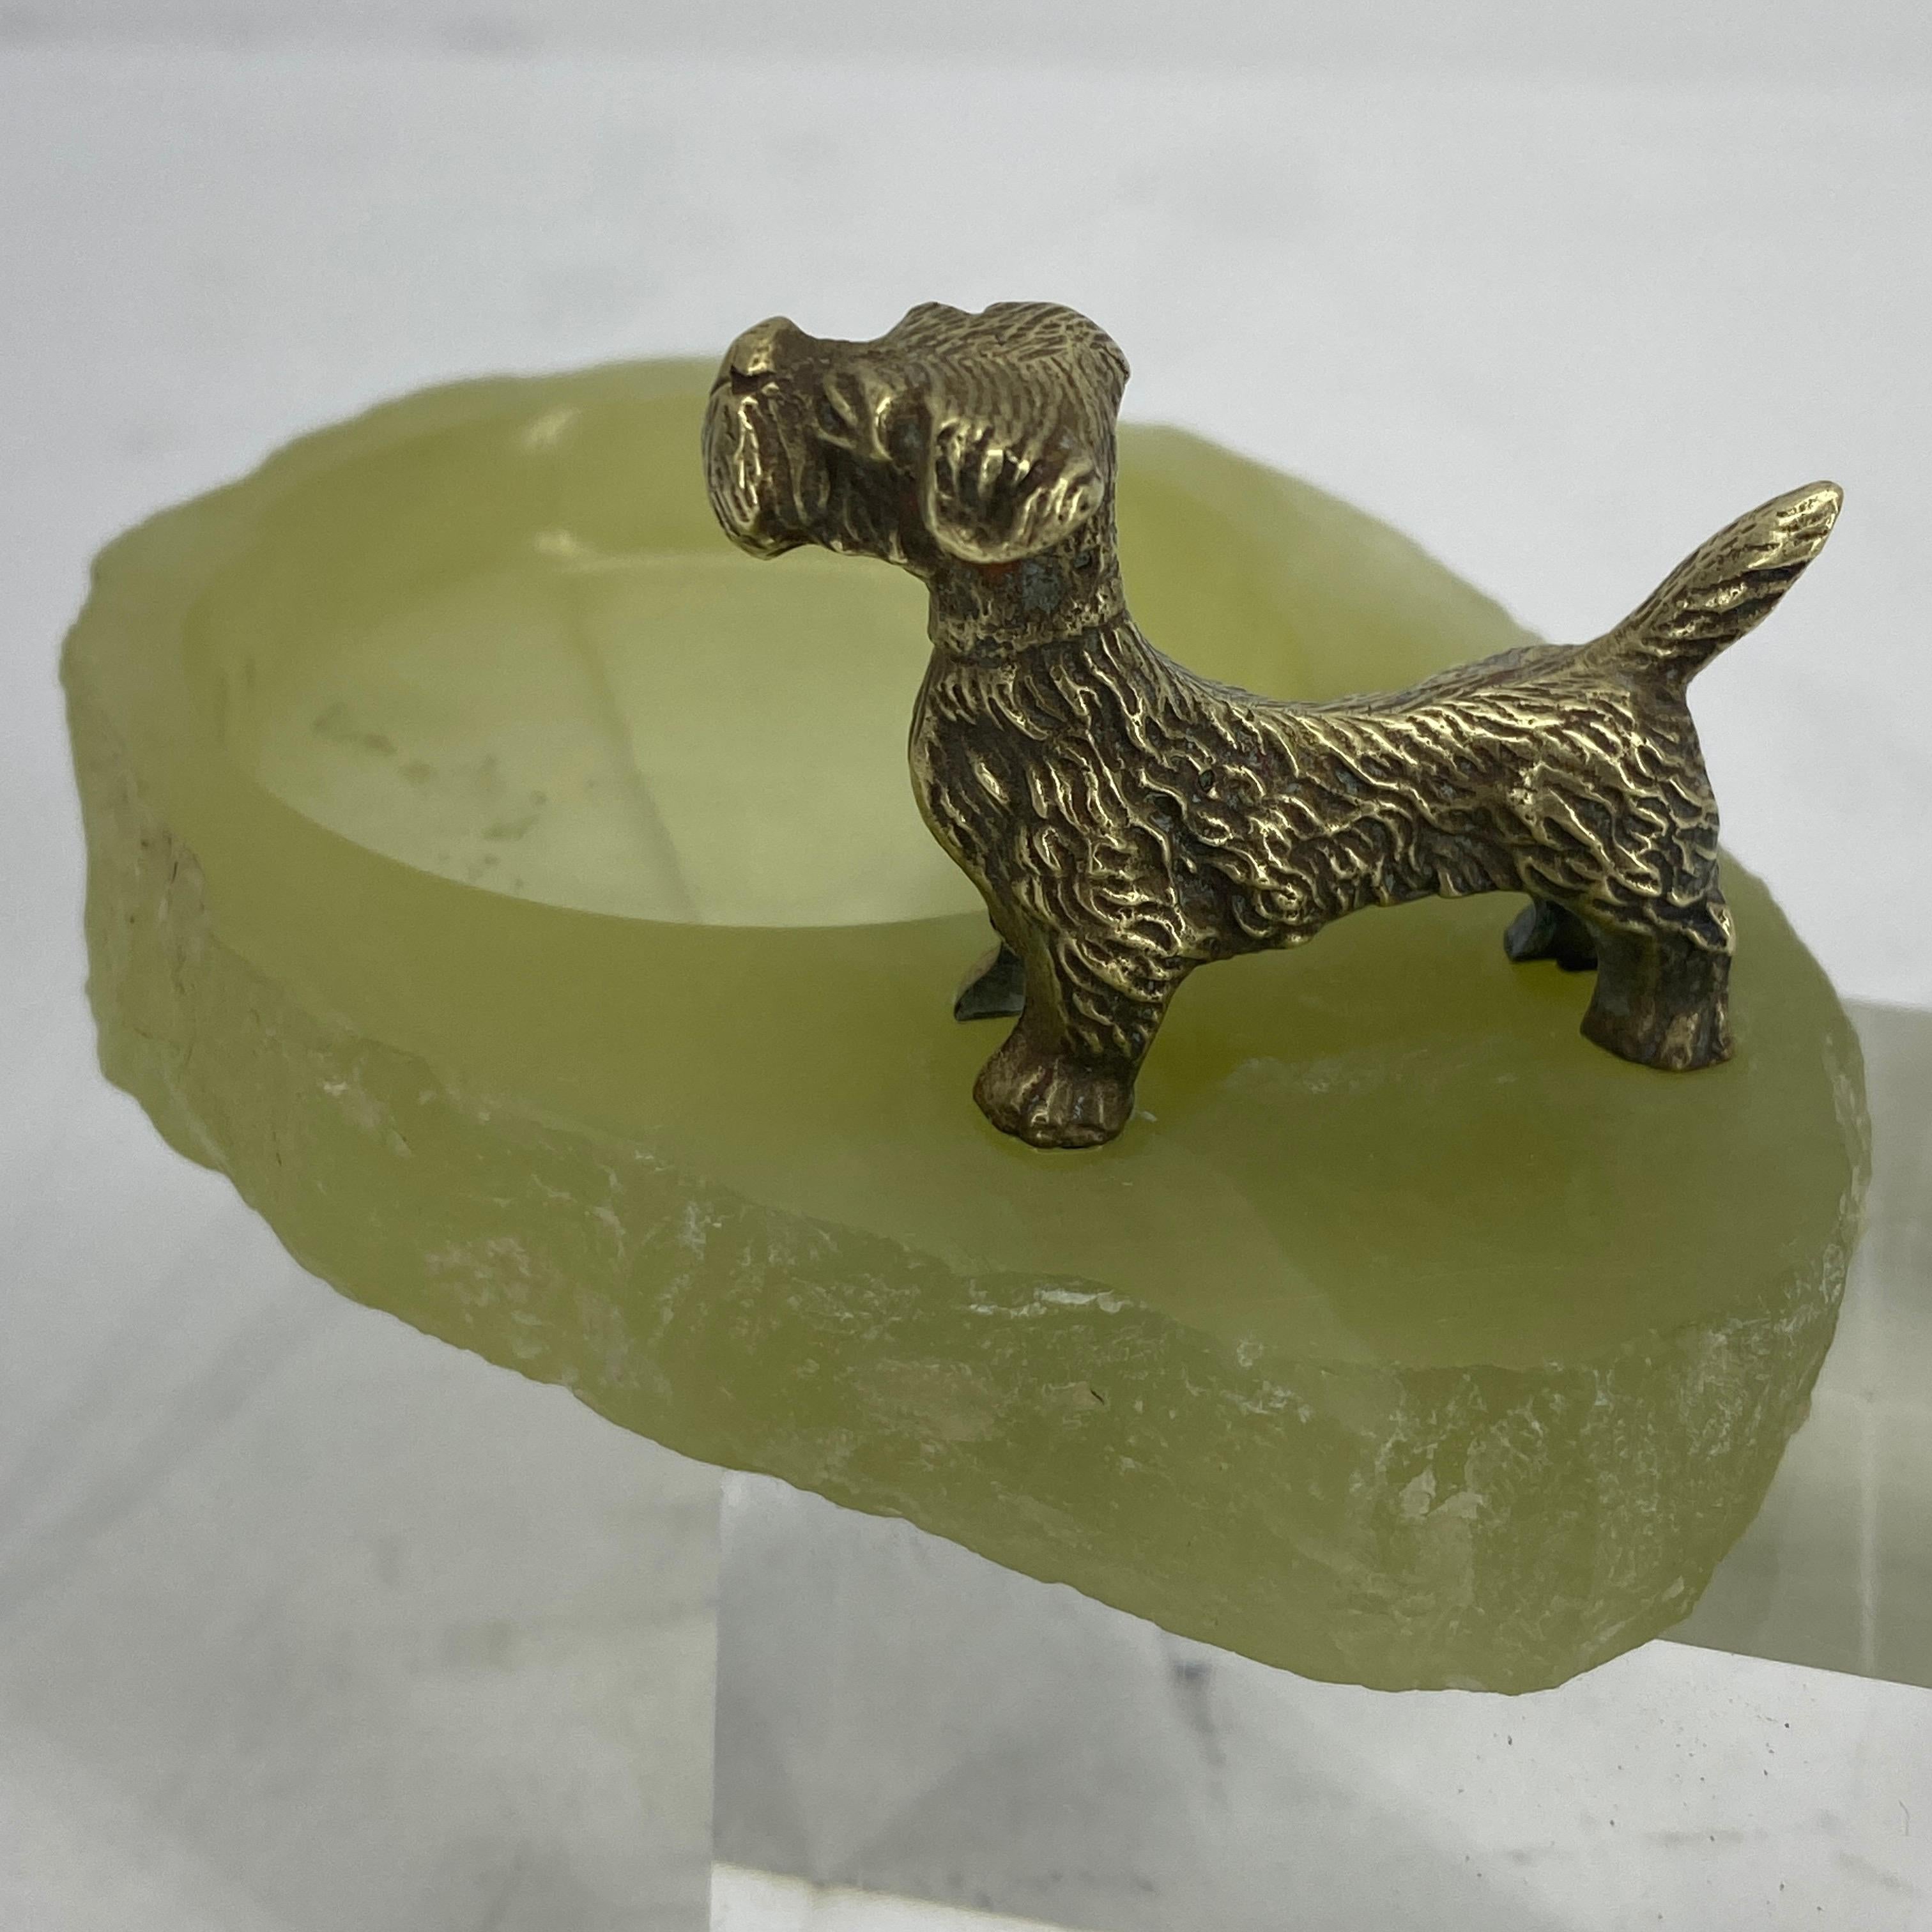 Pistachio Green Onyx and Bronze Terrier Ashtray or Jewelry Tray 3